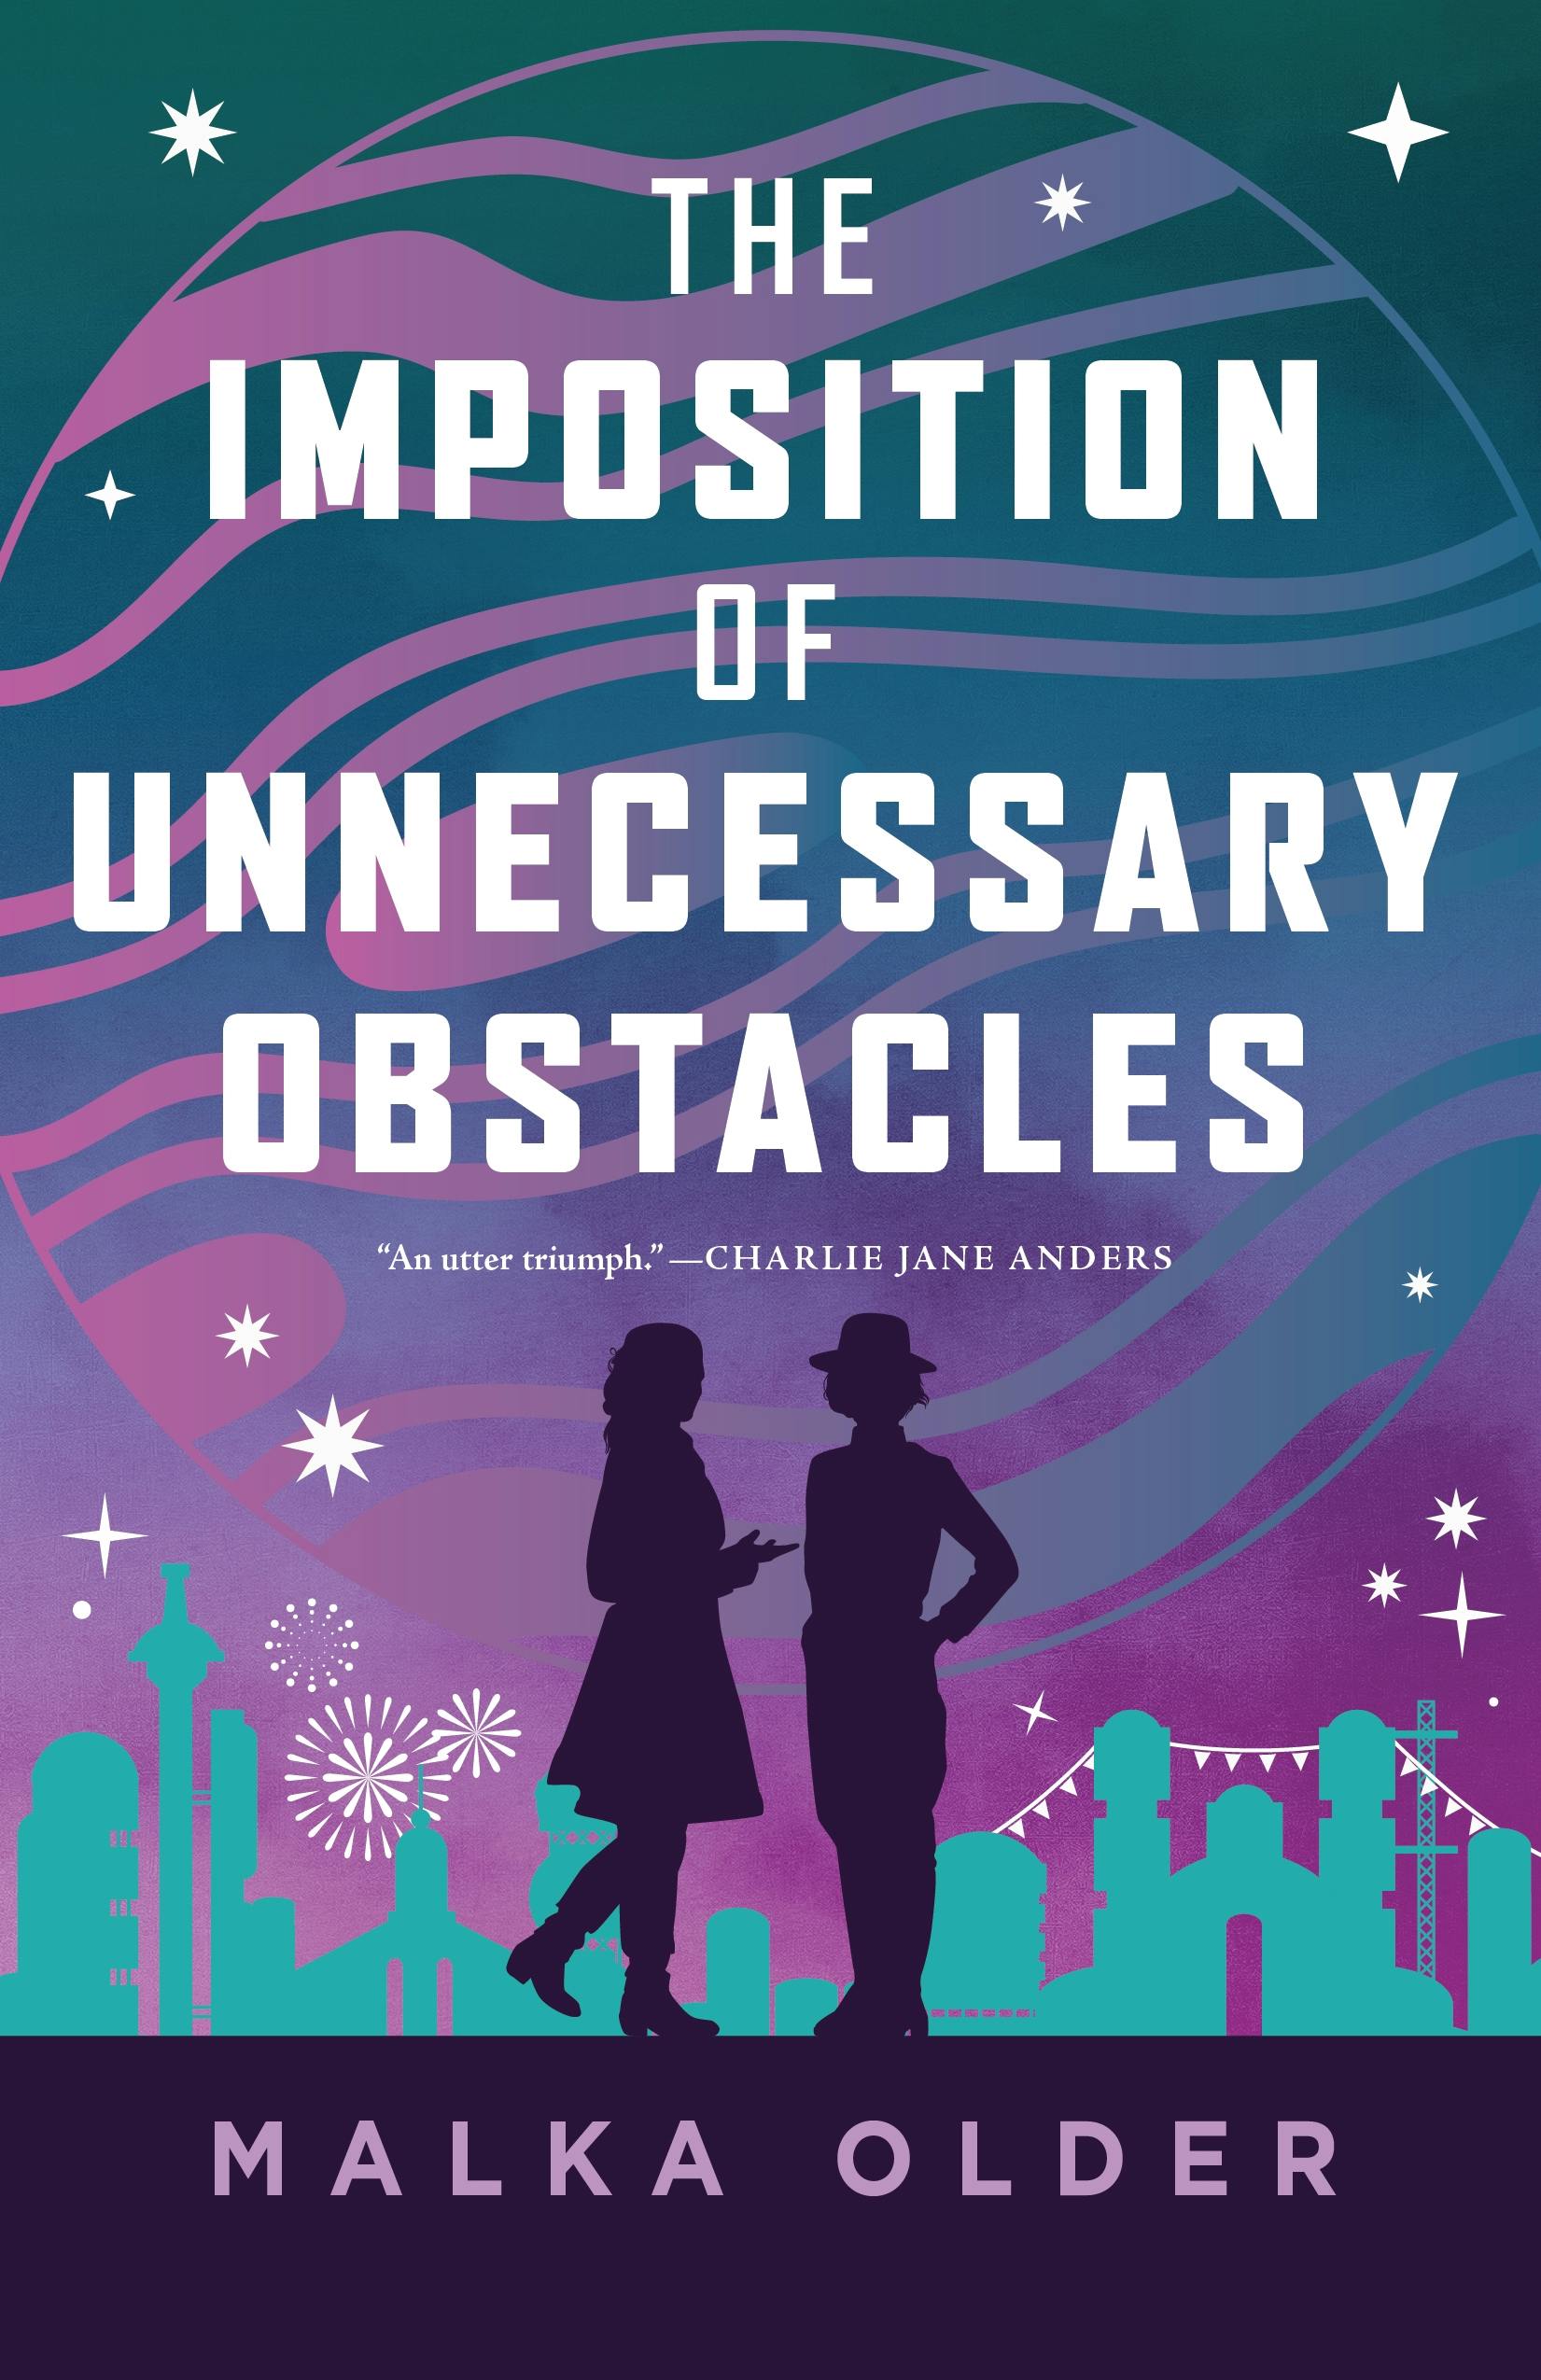 Cover for the book titled as: The Imposition of Unnecessary Obstacles